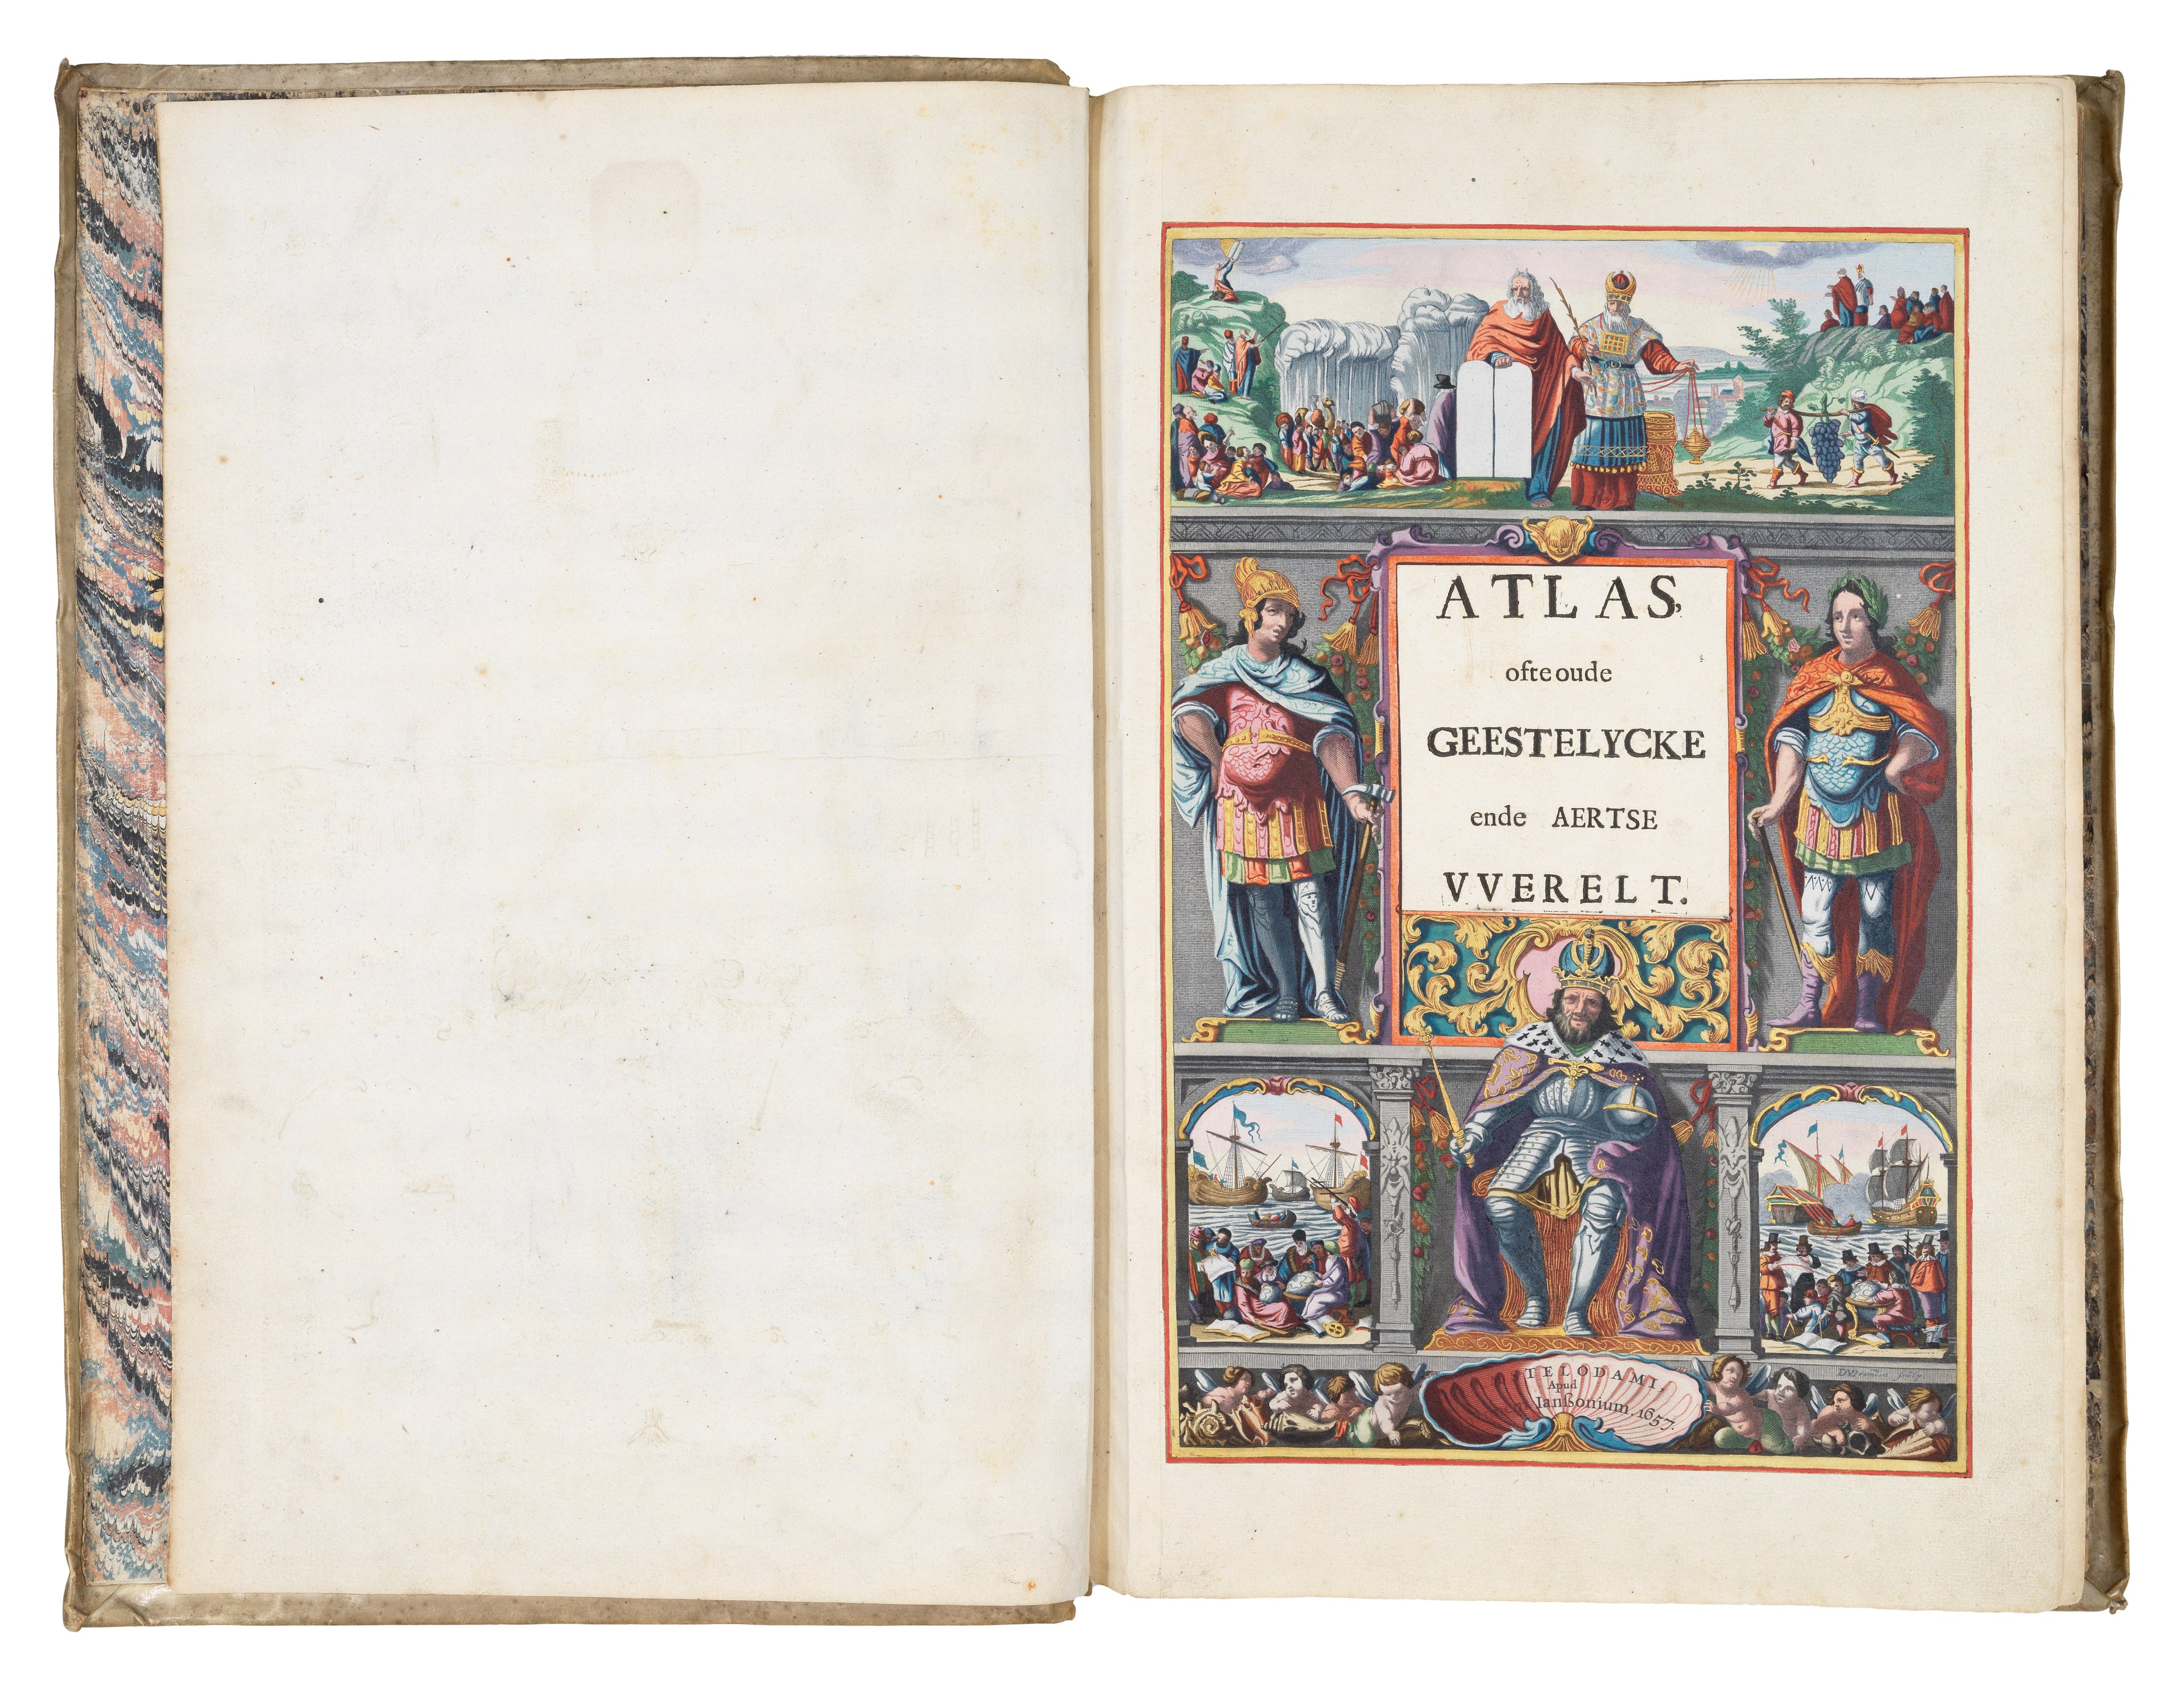 Excerpt from Atlas with illustrations by Master Colourist, Dirk Jansz van Santen, from the Dutch Golden Age